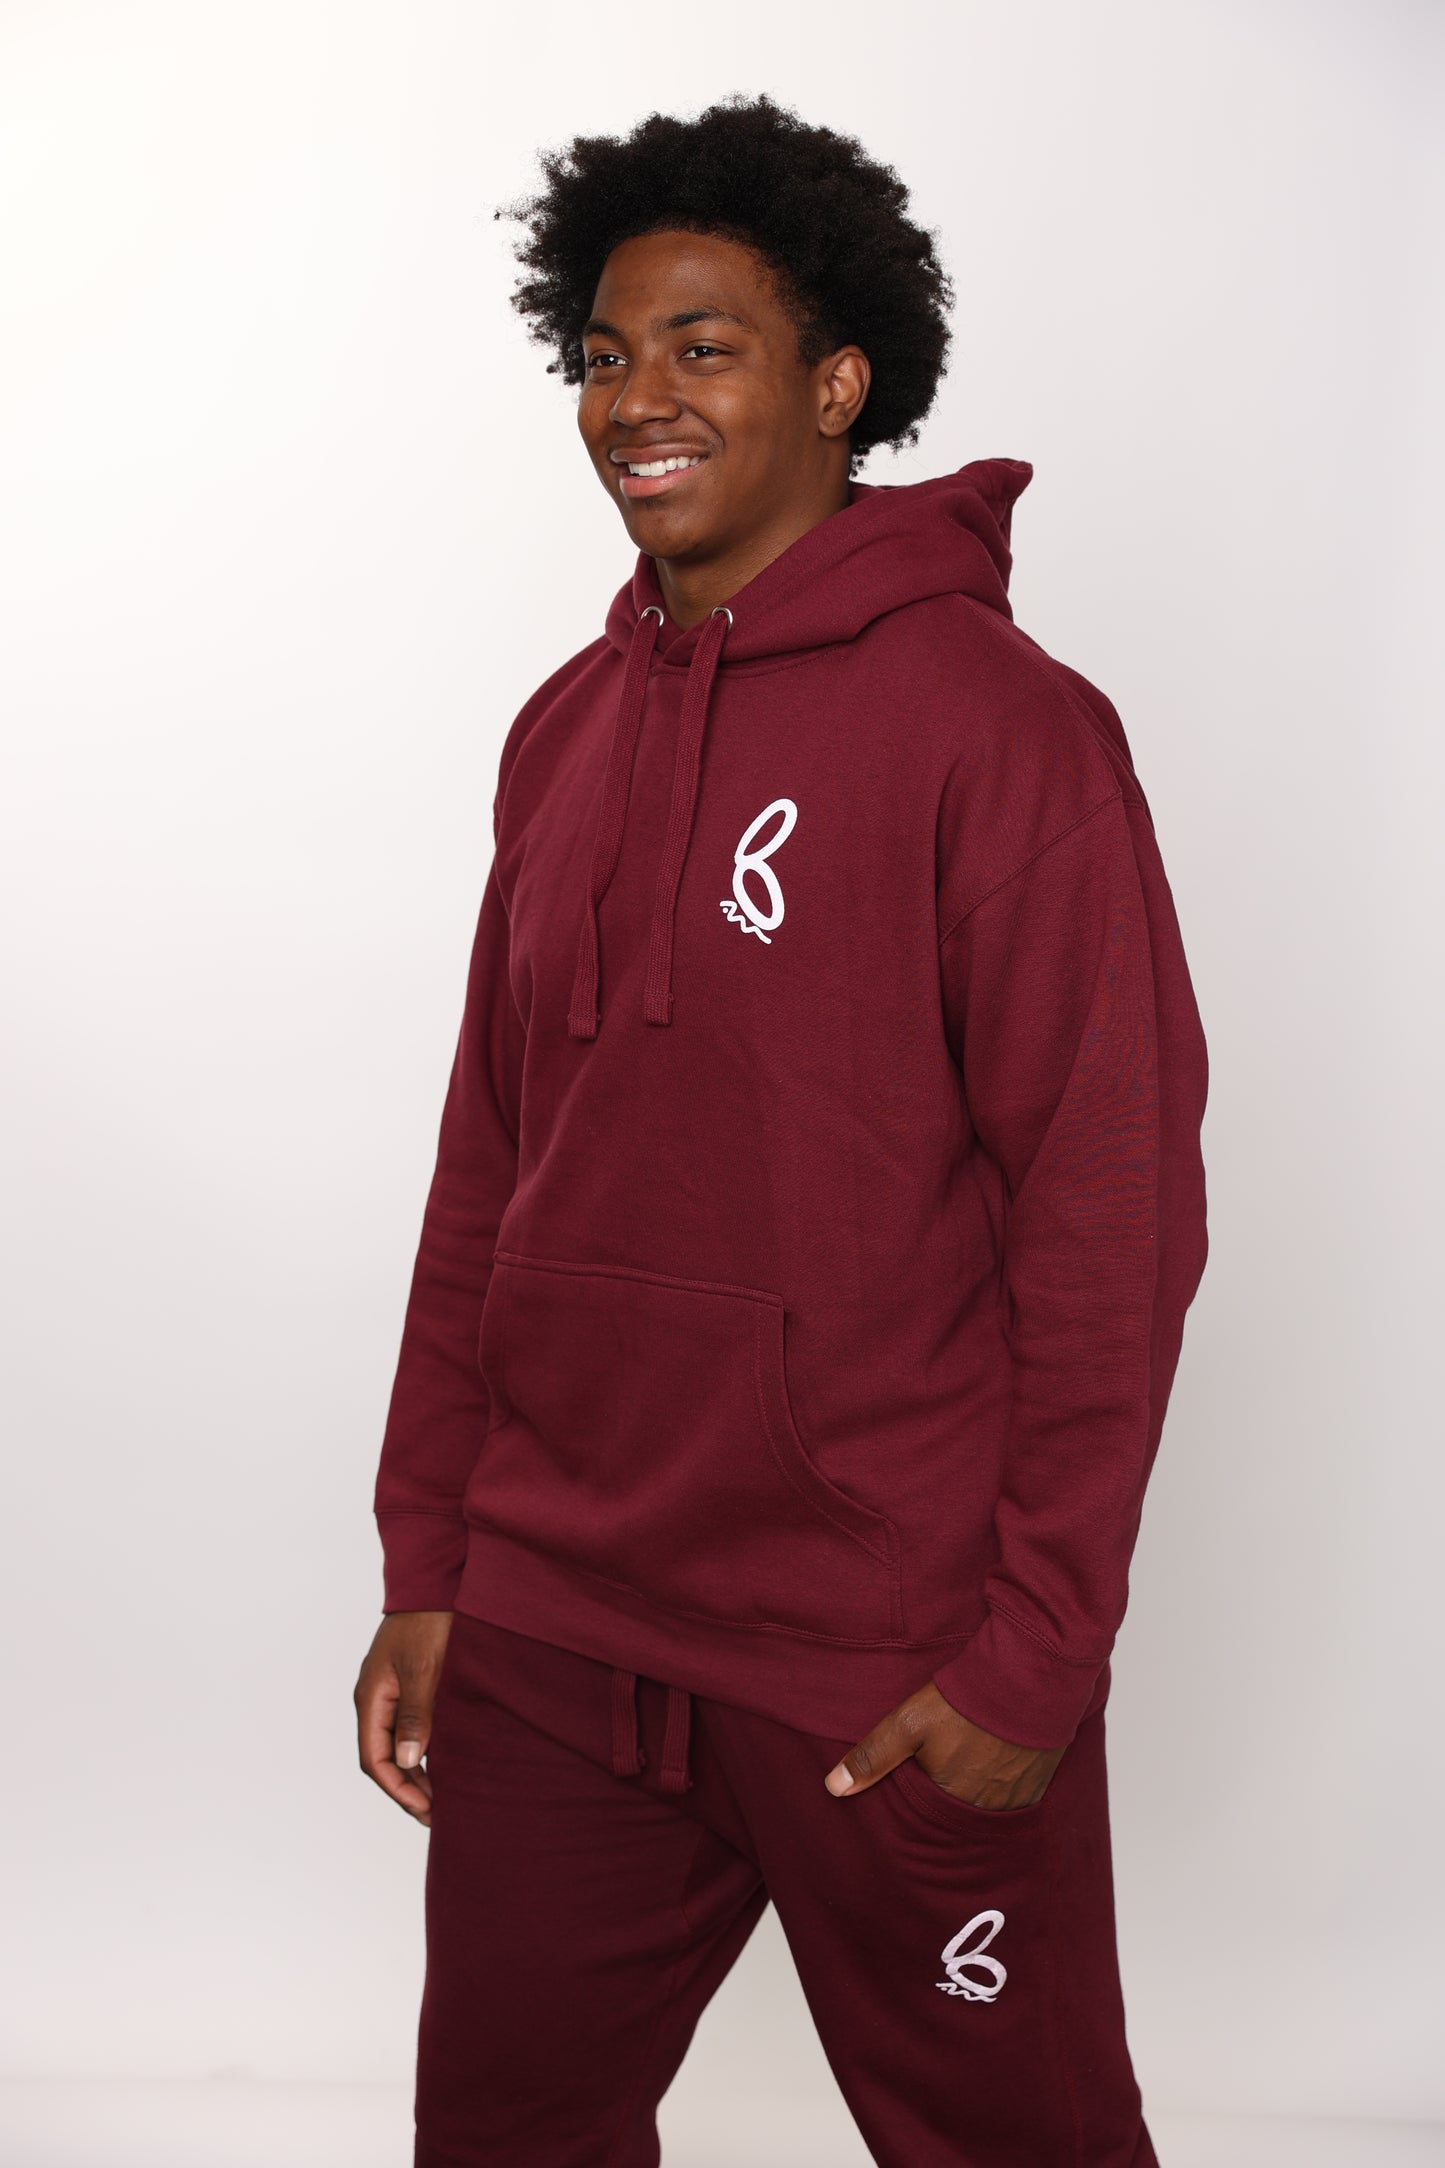 Ambitious & Motivated Hoodie - Maroon